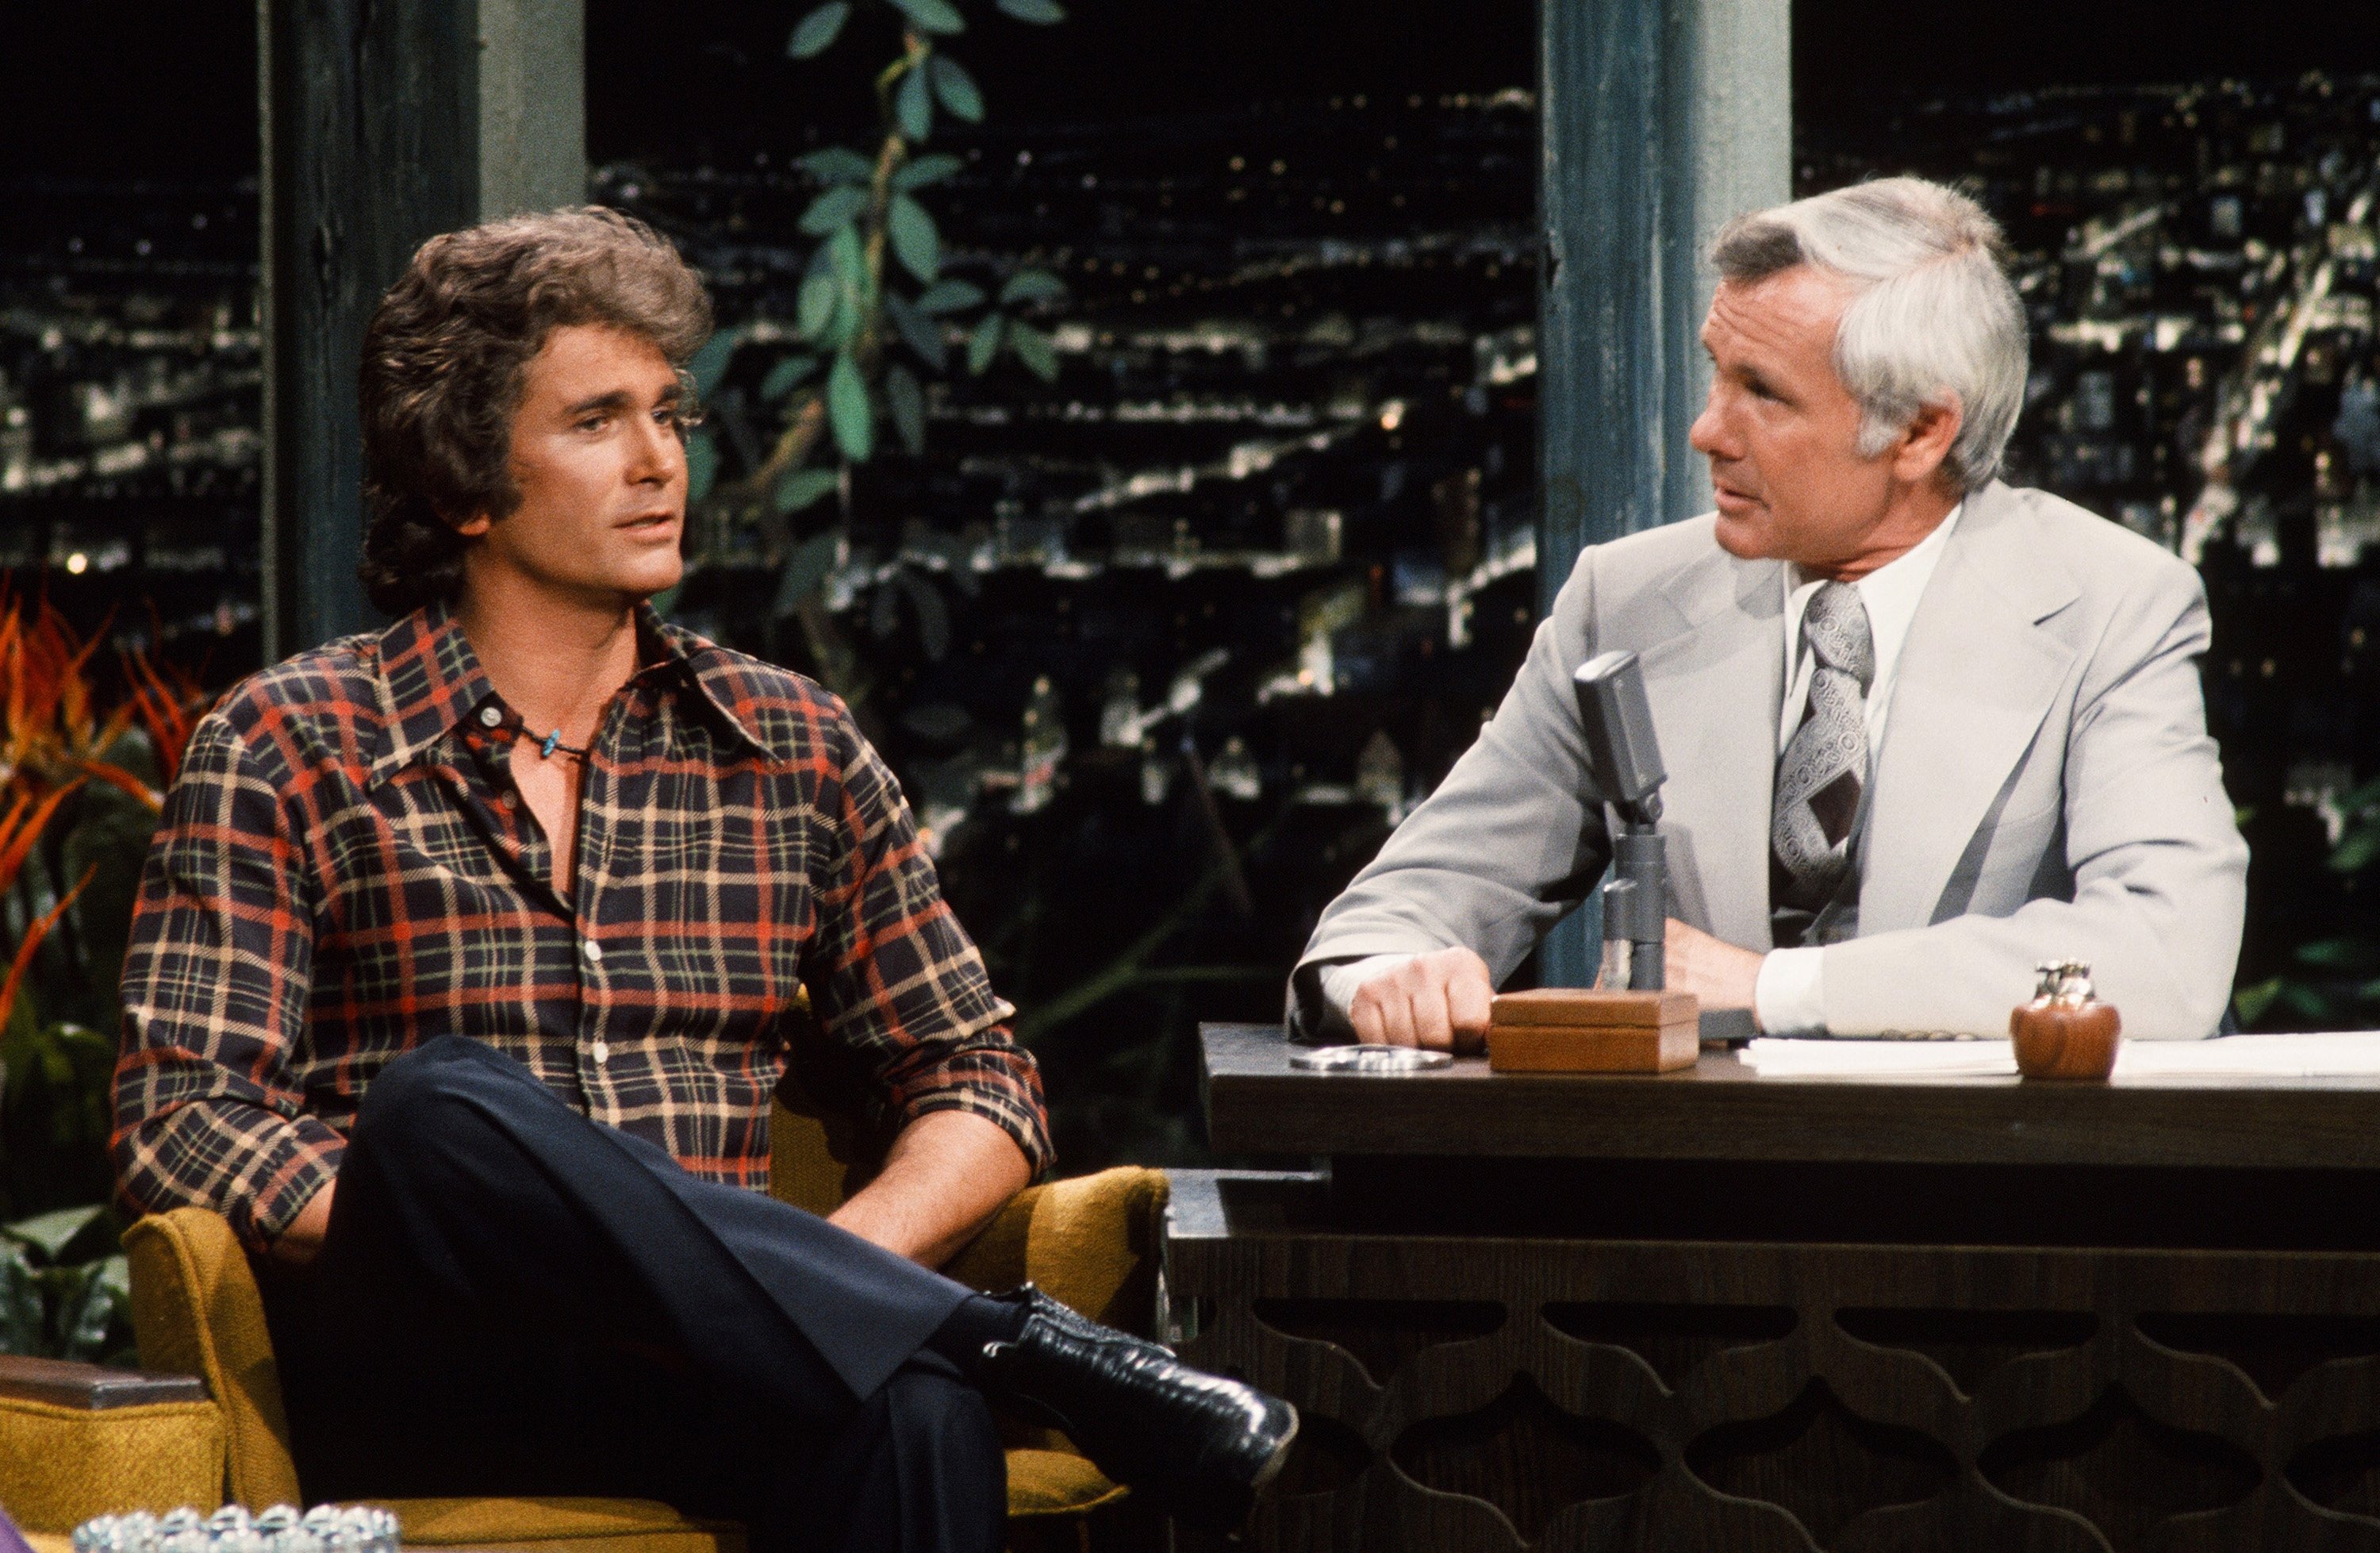 Michael Landon on 'The Tonight Show Starring Johnny Carson' in 1975